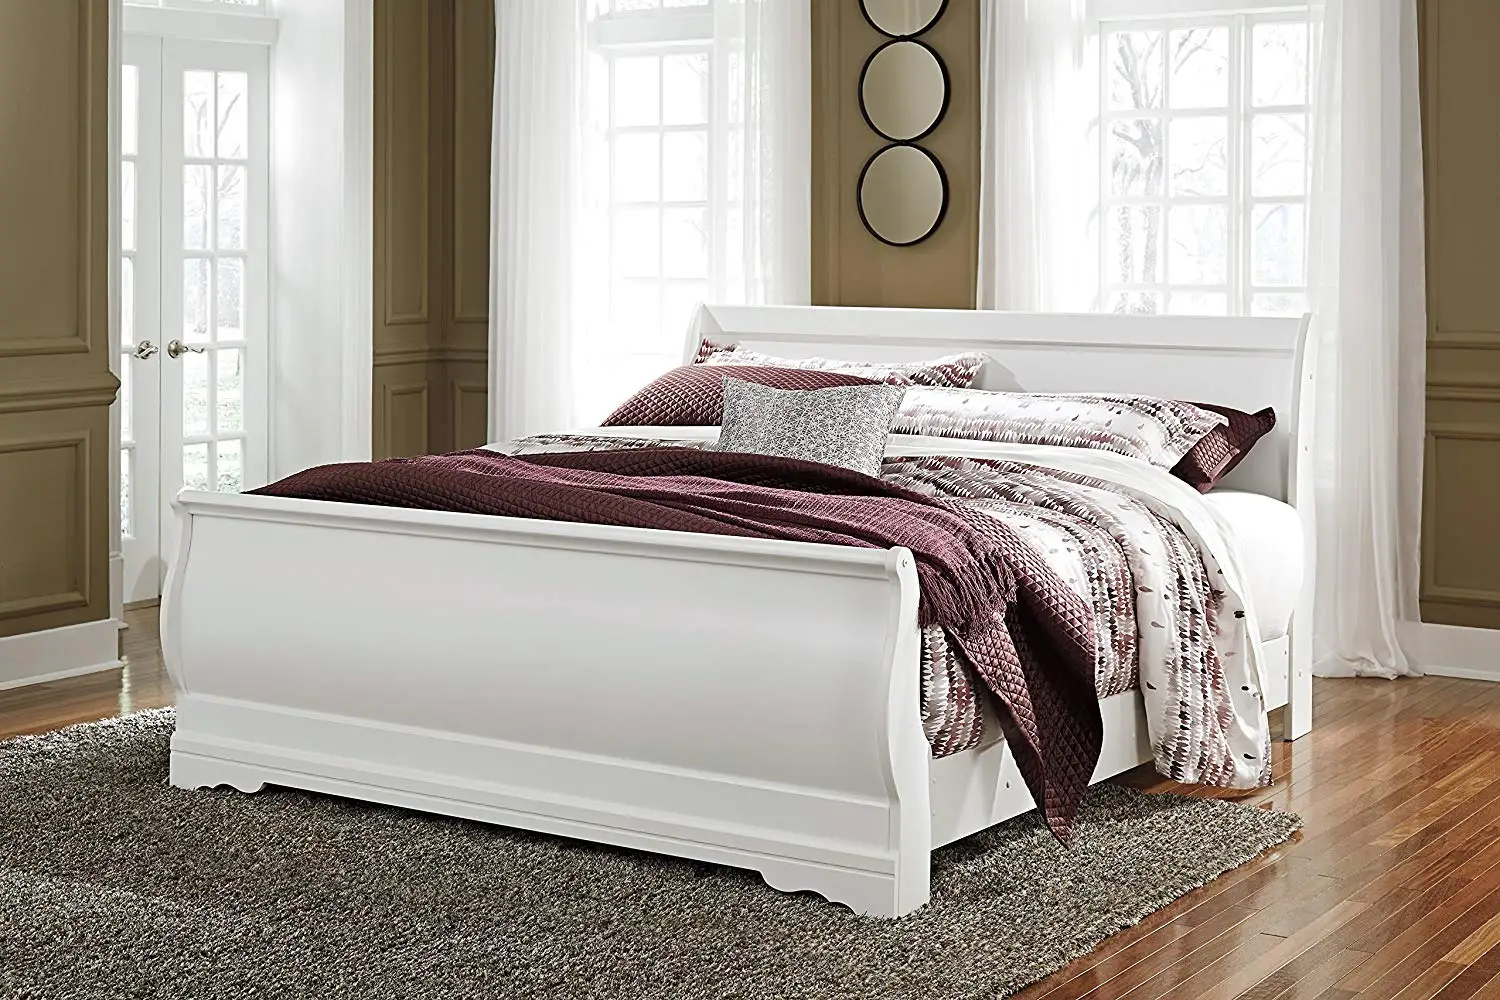 Cheap White King Size Sleigh Bed, find White King Size